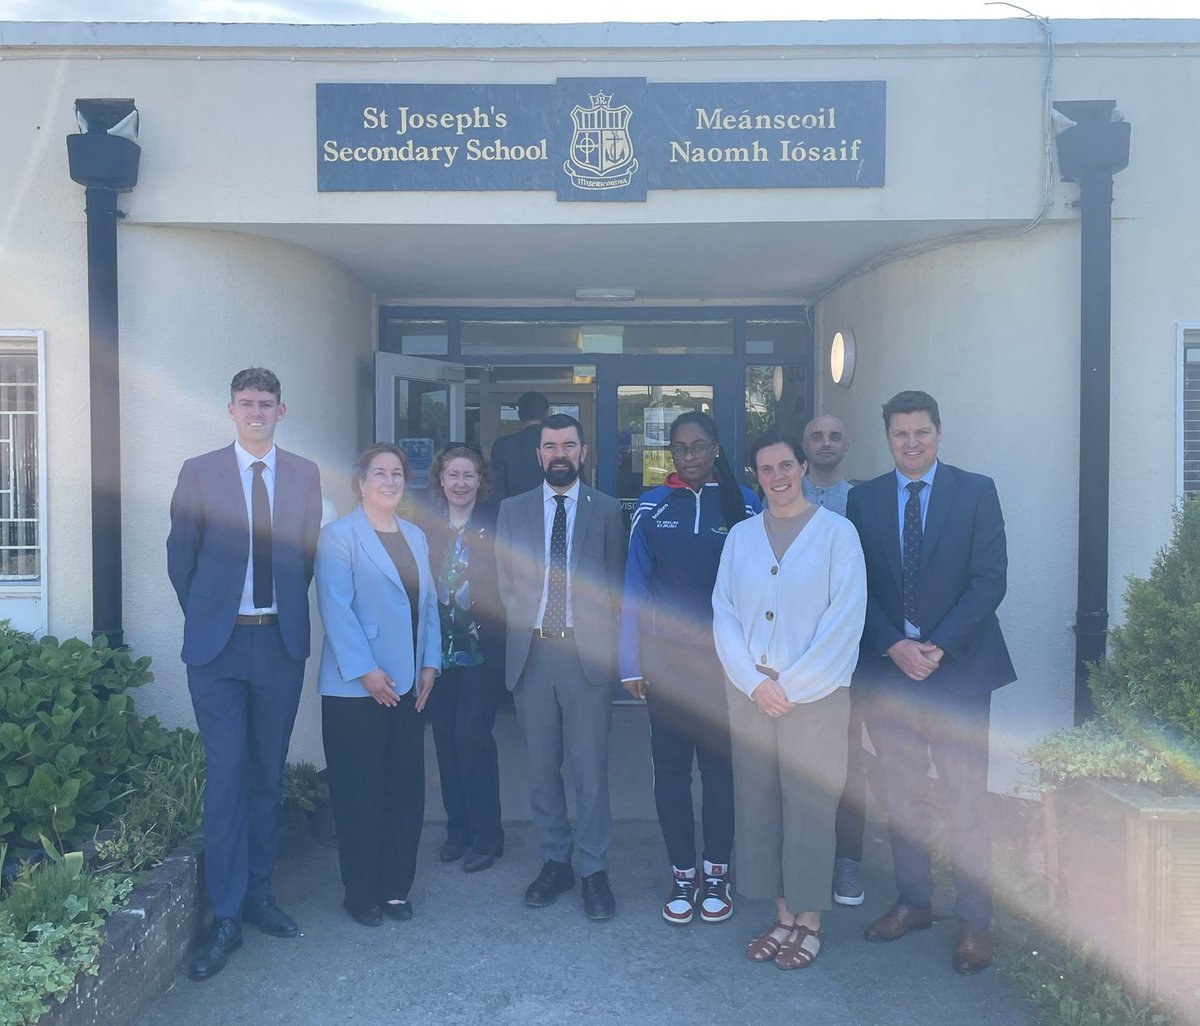 As part of the #EuropeDay celebrations, Amb Florence Ensch was honoured to accompany Minister of State Joe O'Brien on a 🇪🇺themed visit to St. Joseph's Secondary School in Rush today. Wonderful to meet one of the 2 #Luxembourg students currently enrolled in St.Joseph!